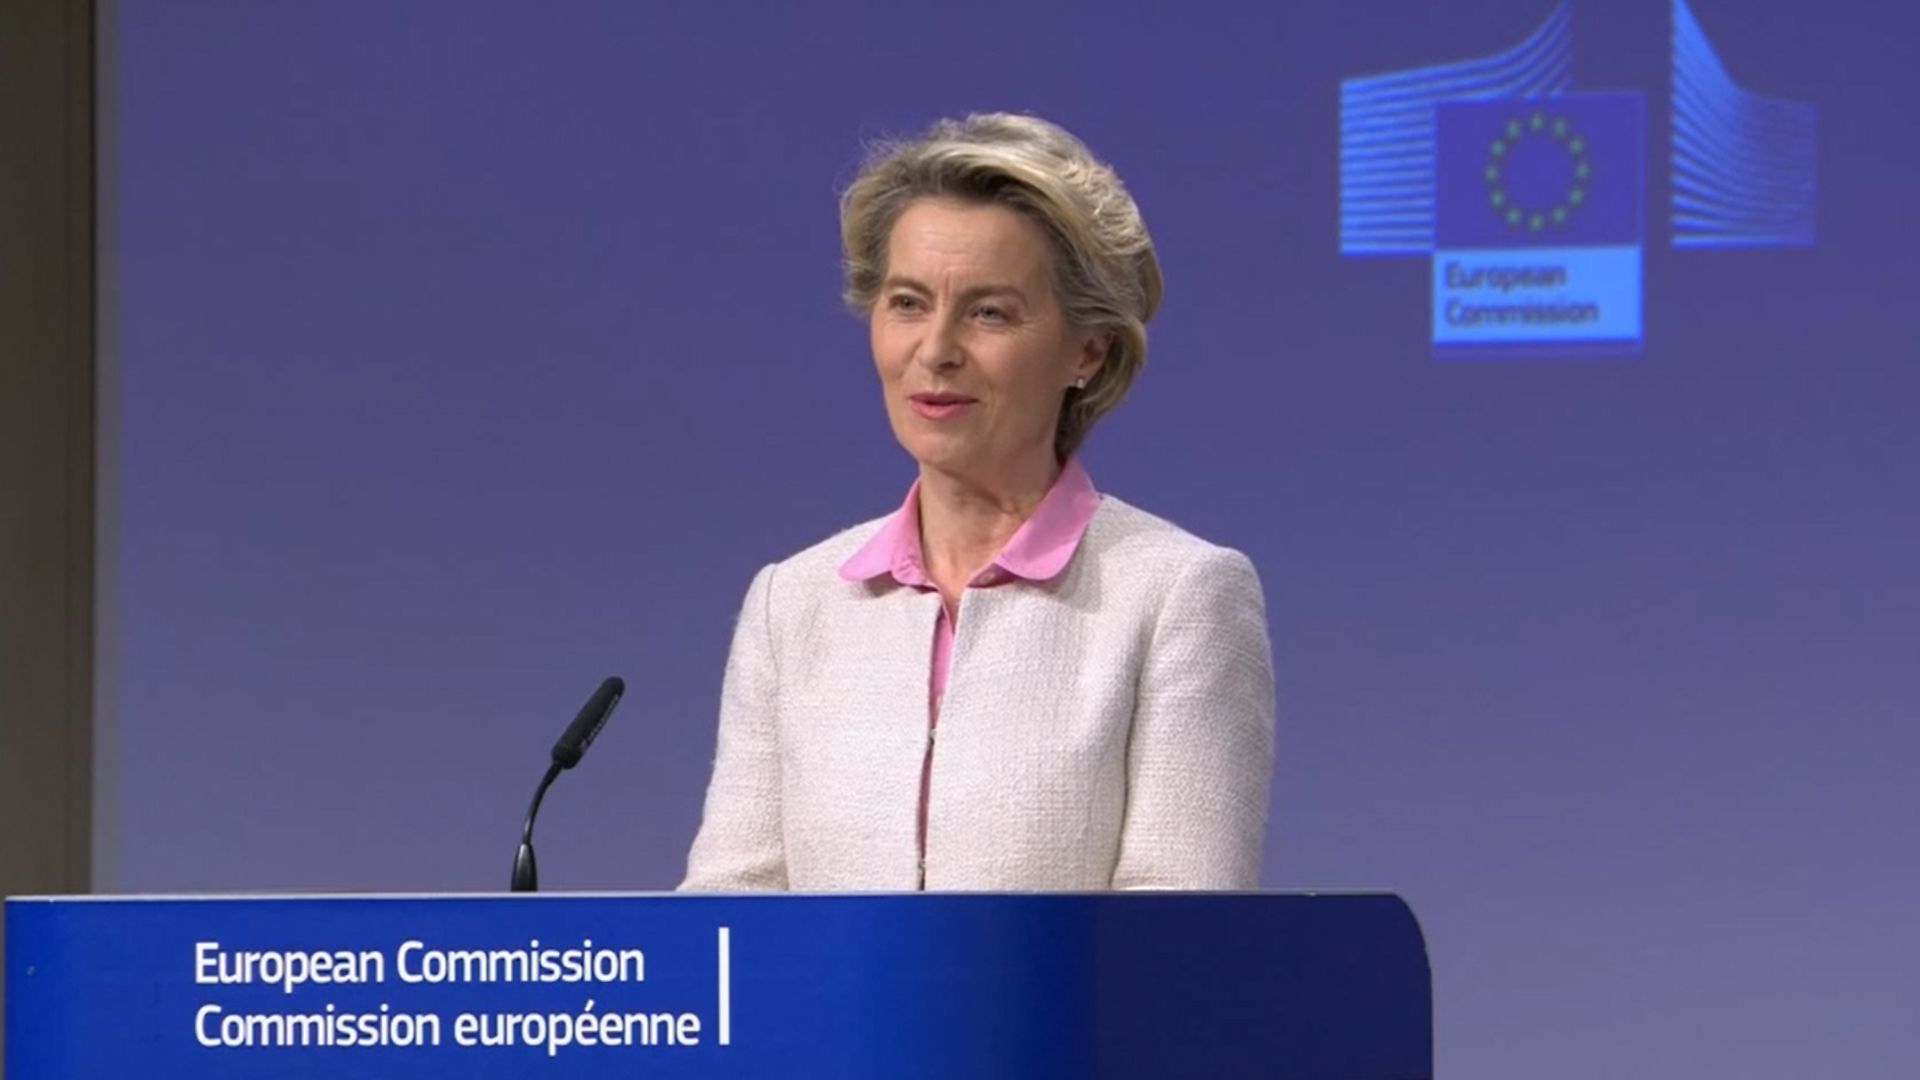 Screen grab of European Commission president Ursula von der Leyen during a media briefing in Brussels - Credit: PA